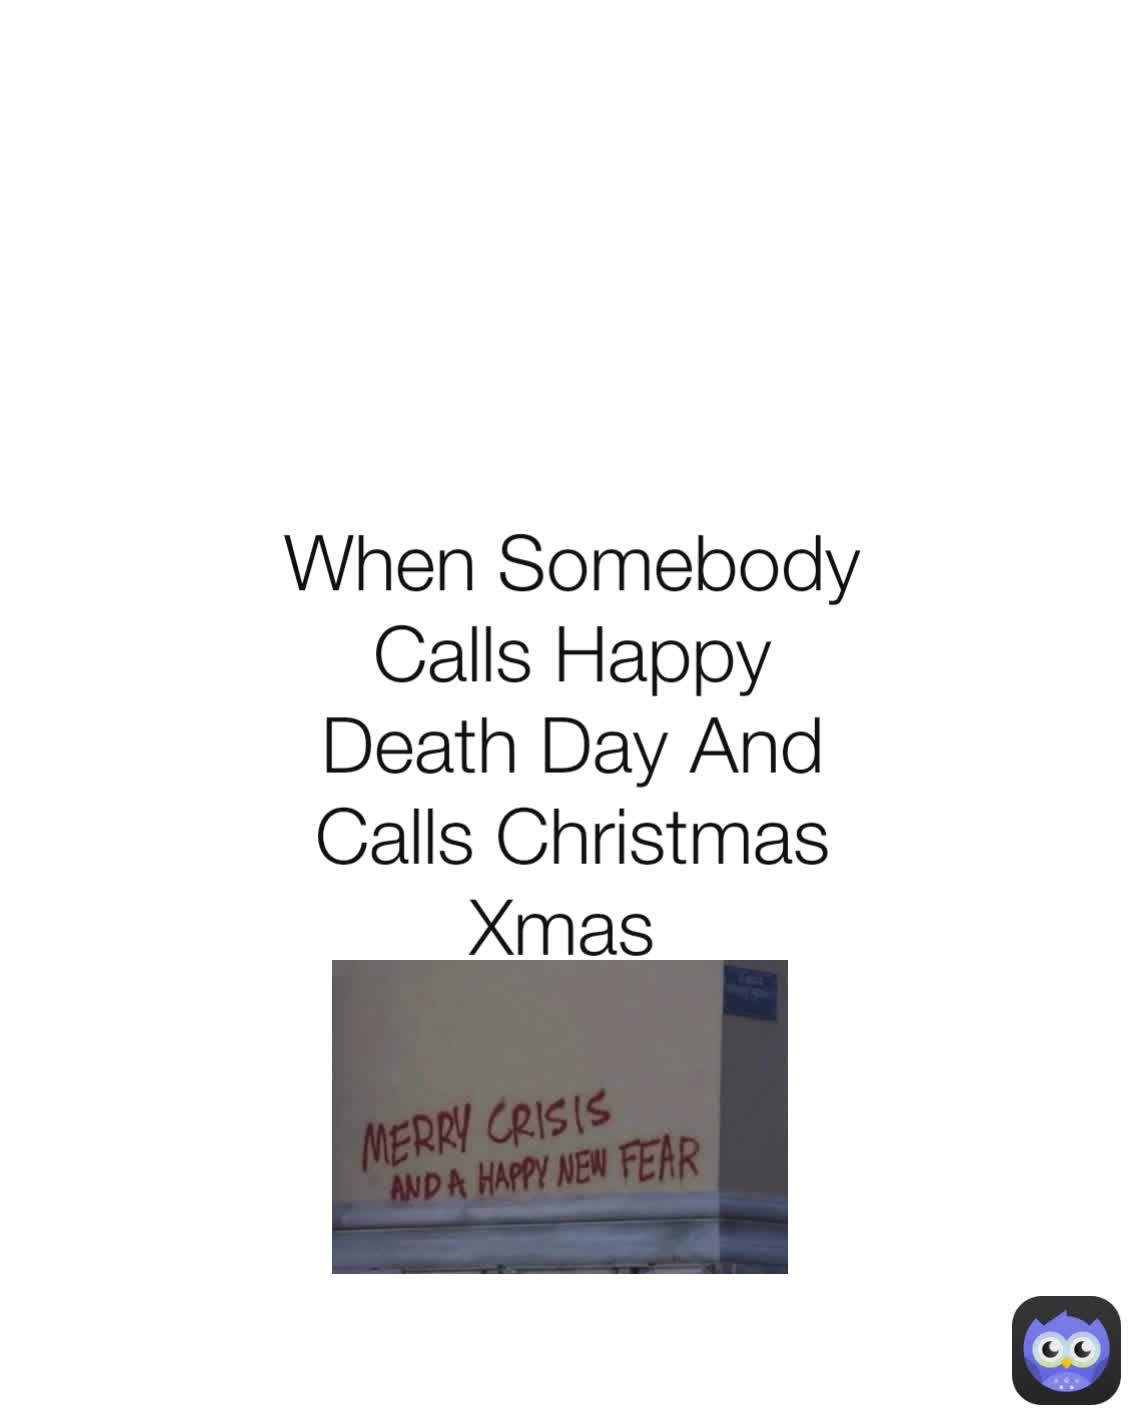 When Somebody Calls Happy Death Day And Calls Christmas Xmas 